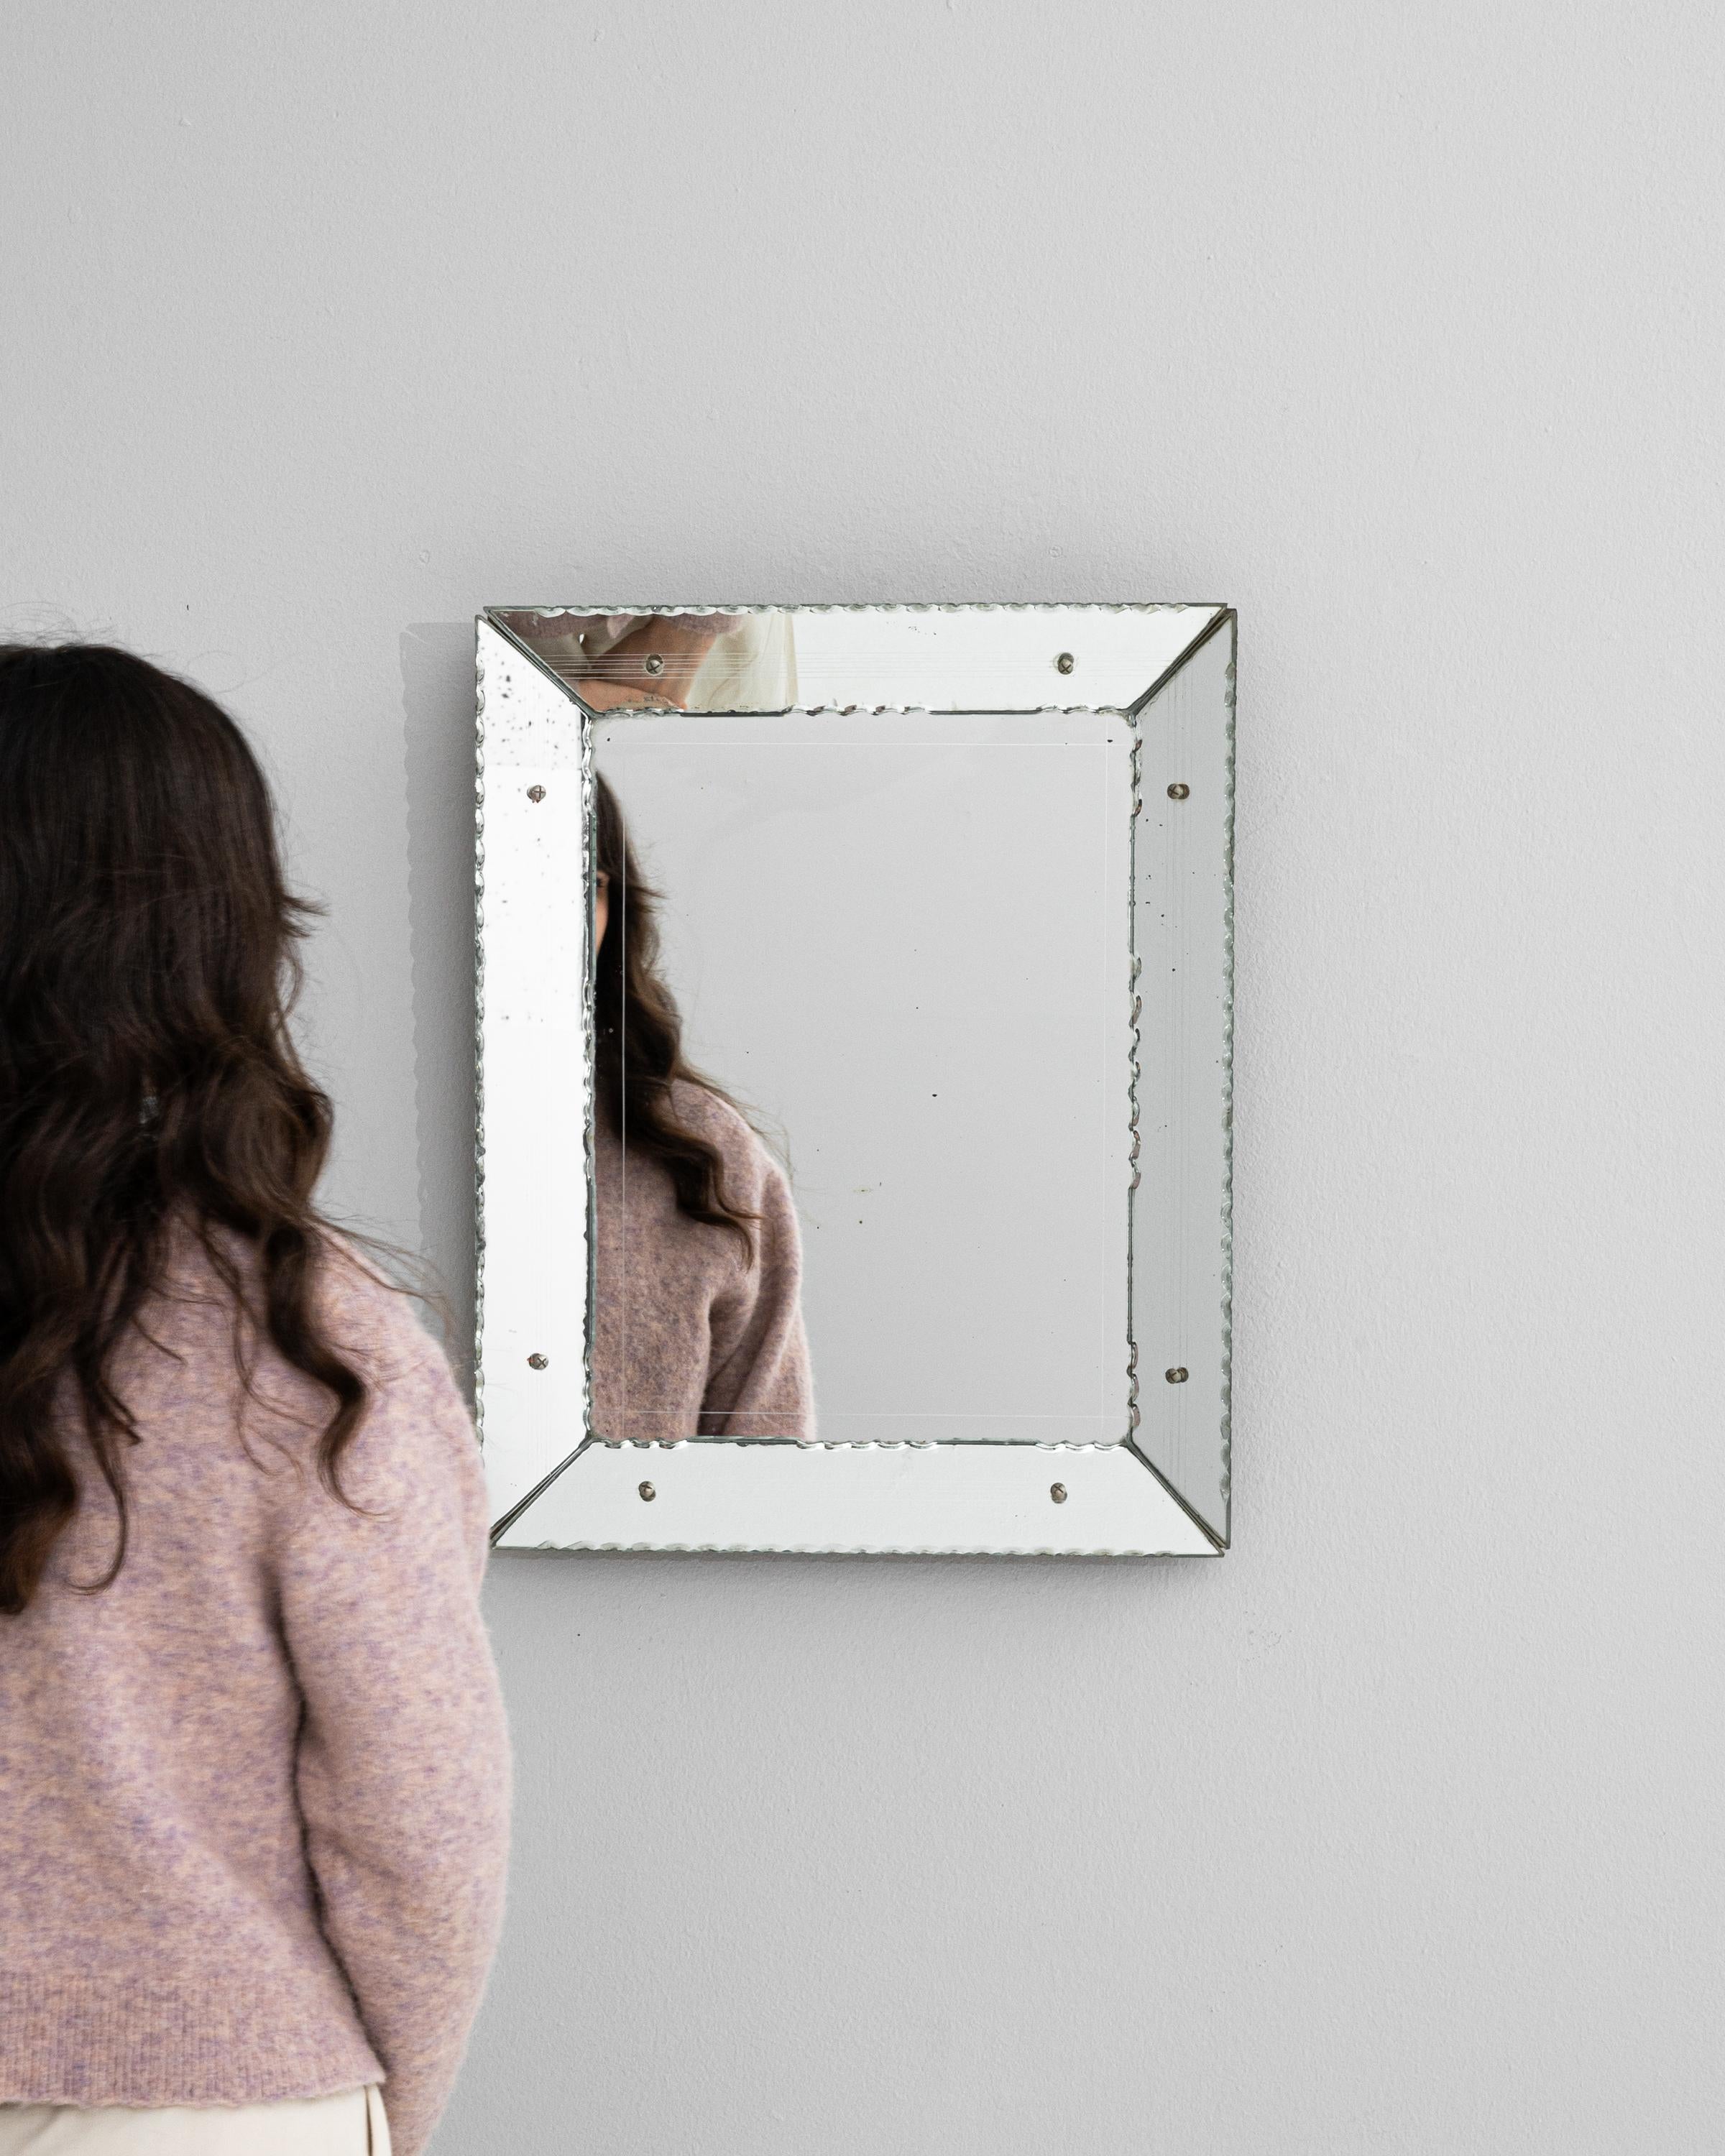 This 20th Century Italian Mirror is a quintessential example of timeless design blended with functional art. The sleek, square frame, adorned with distinctive screw caps, presents a clean, industrial aesthetic while paying homage to the mirror's